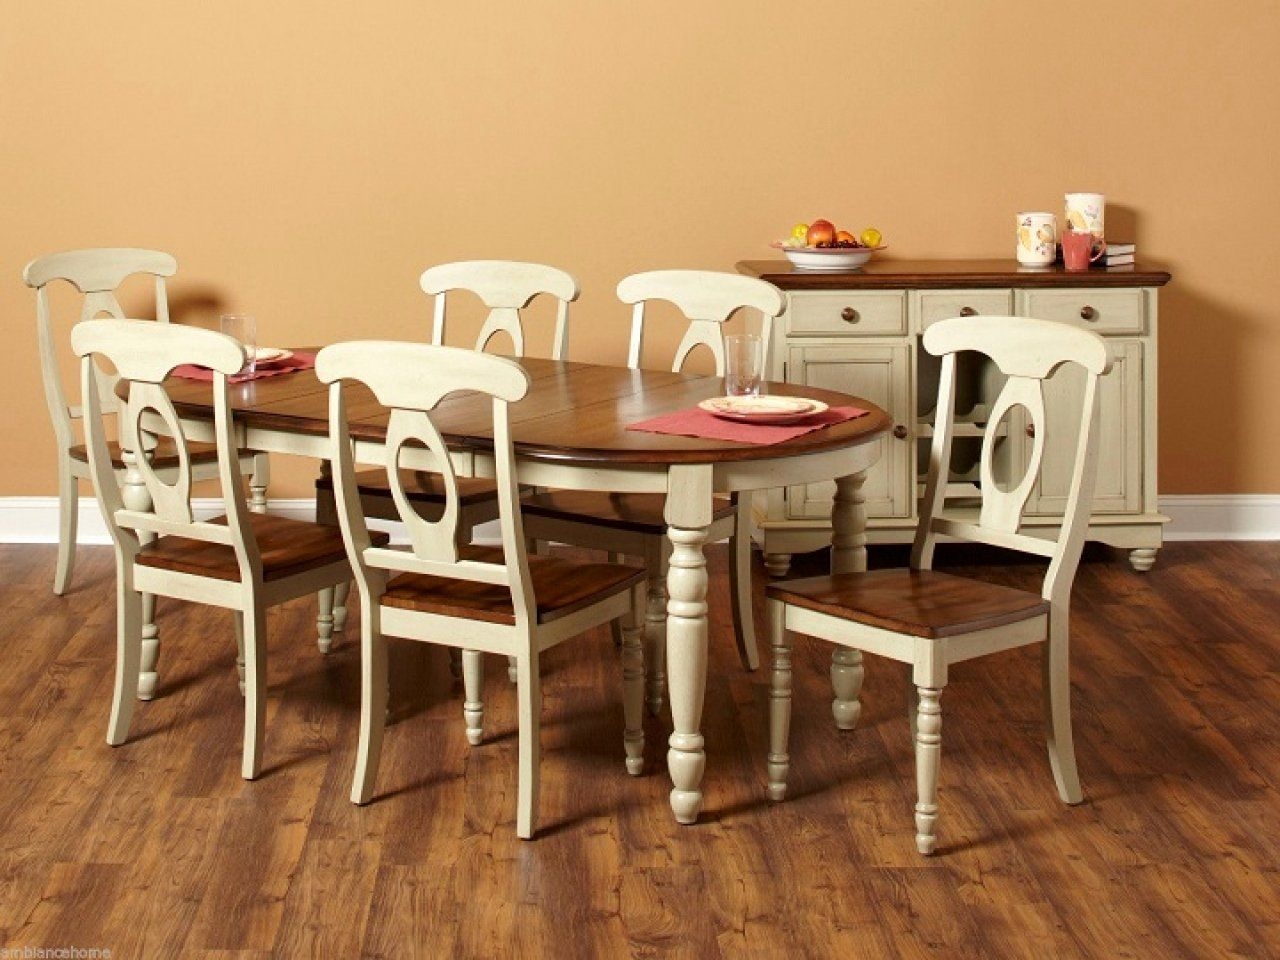 French Country Dining Table You Ll Love, French Country Dining Table And Chairs